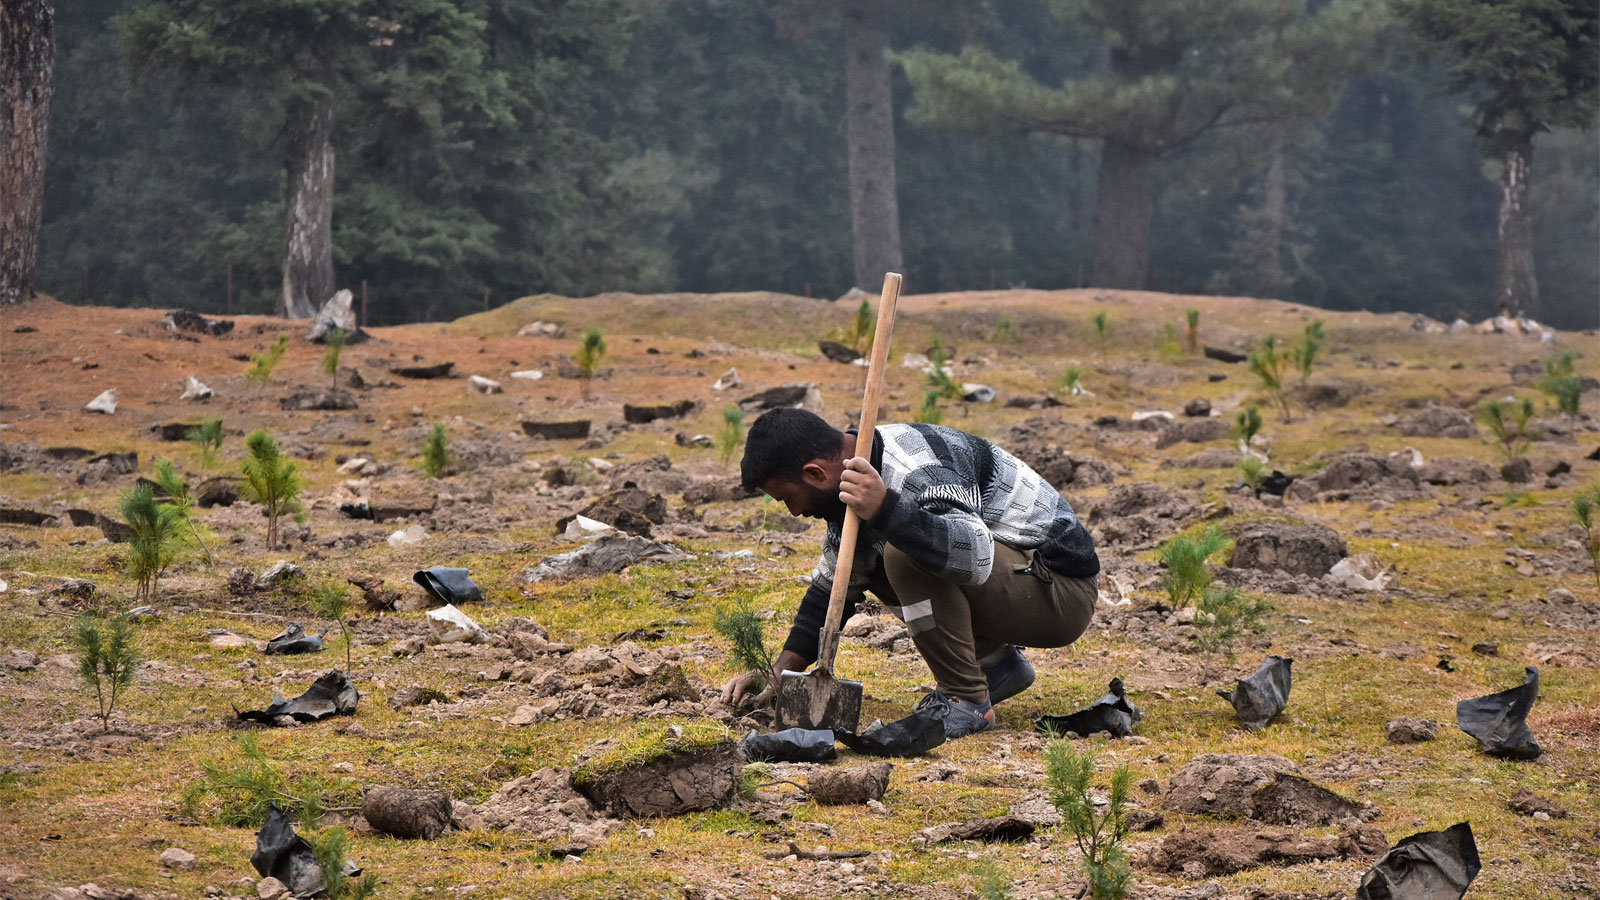 A man crouching and planting a tree in a field with newly planted trees